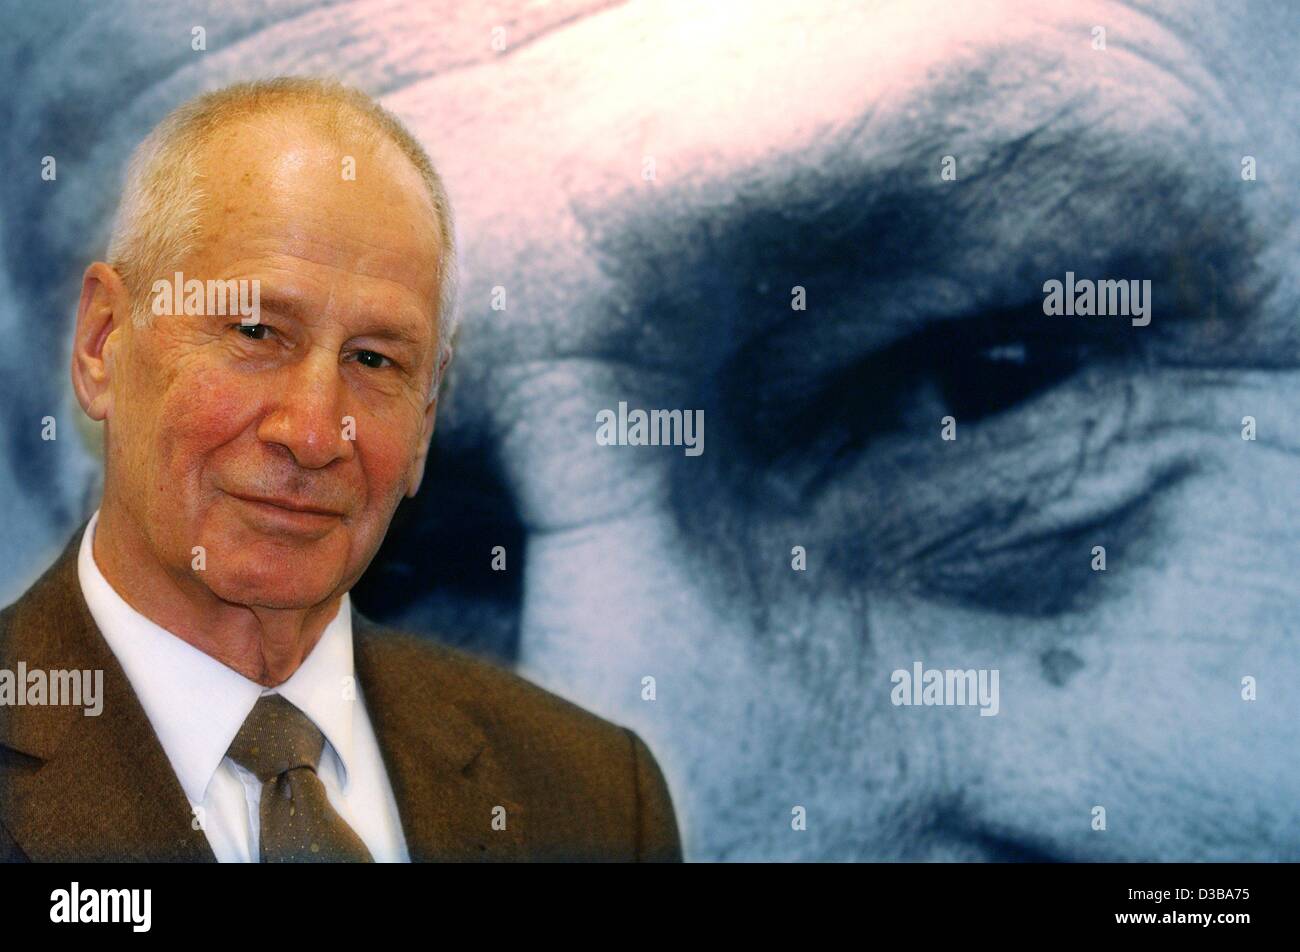 (dpa) - Markus Wolf, former spy for the German Democratic Republic (GDR), poses in front of his portrait at the Book Fair in Frankfurt, 9 October 2002. At the book fair he presented his new book entitled 'Freunde sterben nicht' (friends don't die), in which he narrates his encounters with German, Ru Stock Photo